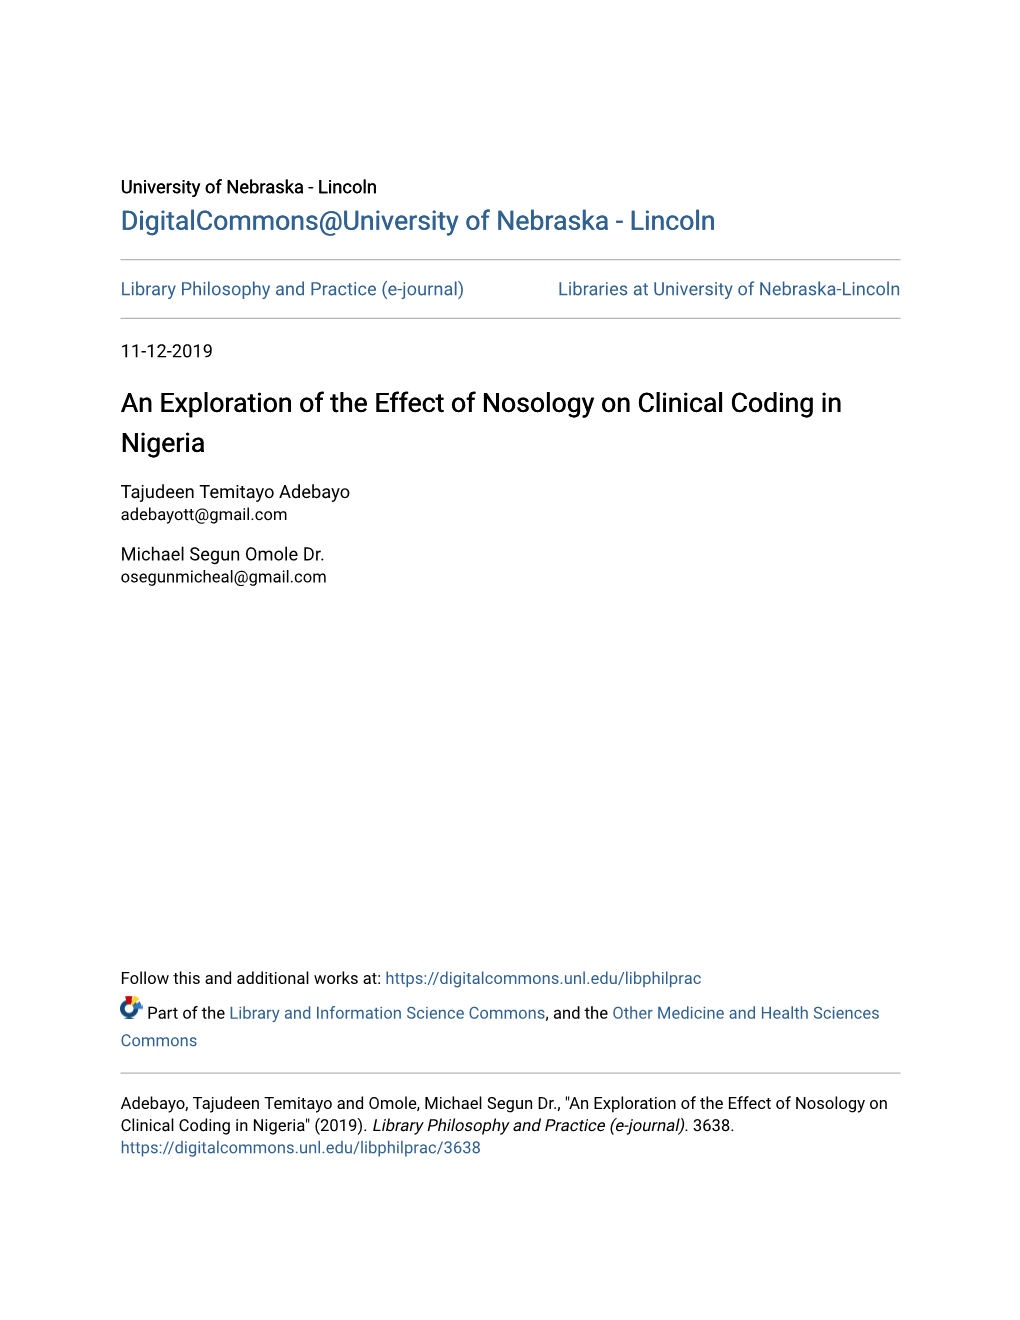 An Exploration of the Effect of Nosology on Clinical Coding in Nigeria